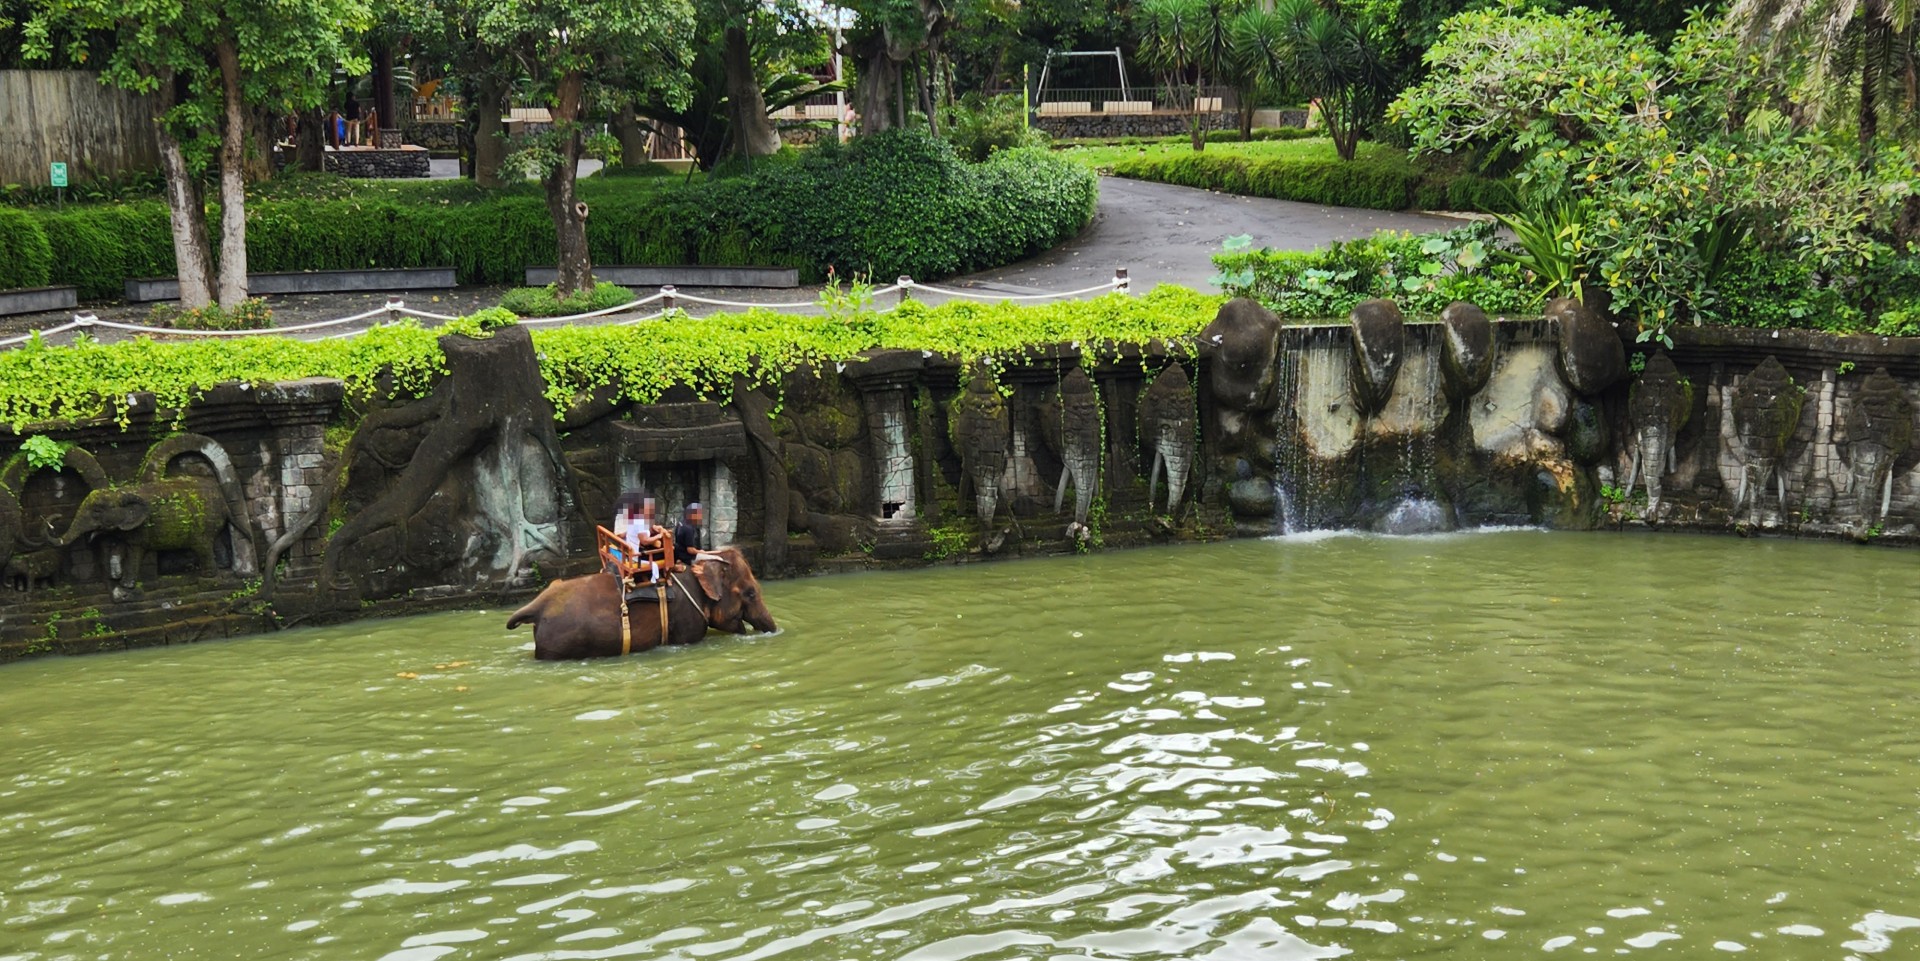 A tourist is seen in the distance riding on a back of an elephant wading through water.